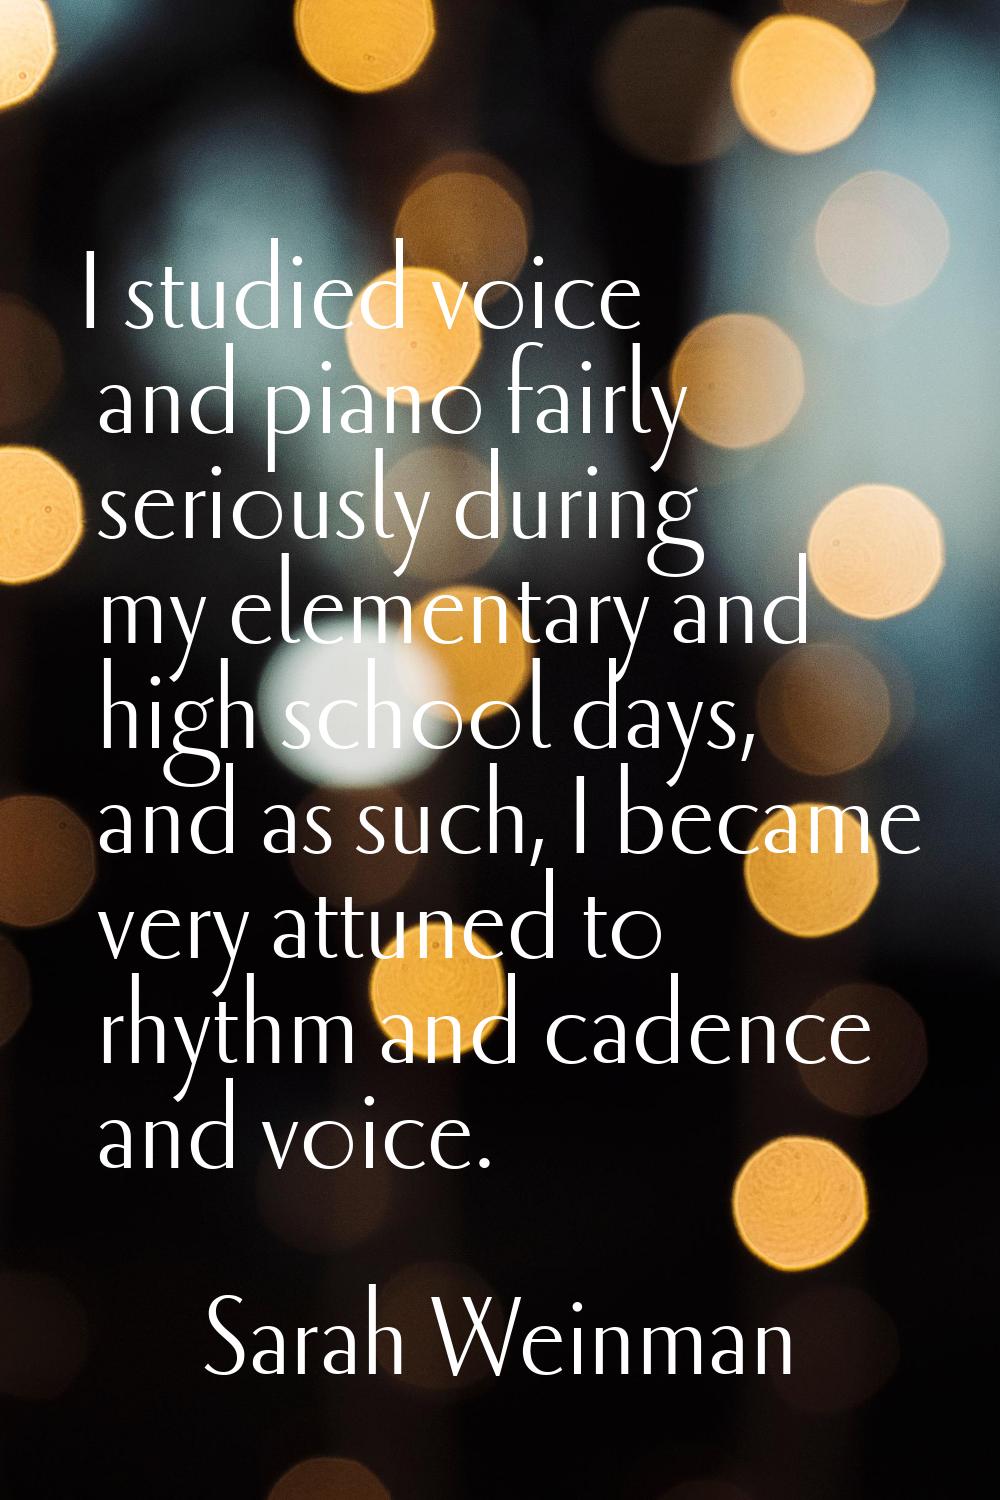 I studied voice and piano fairly seriously during my elementary and high school days, and as such, 